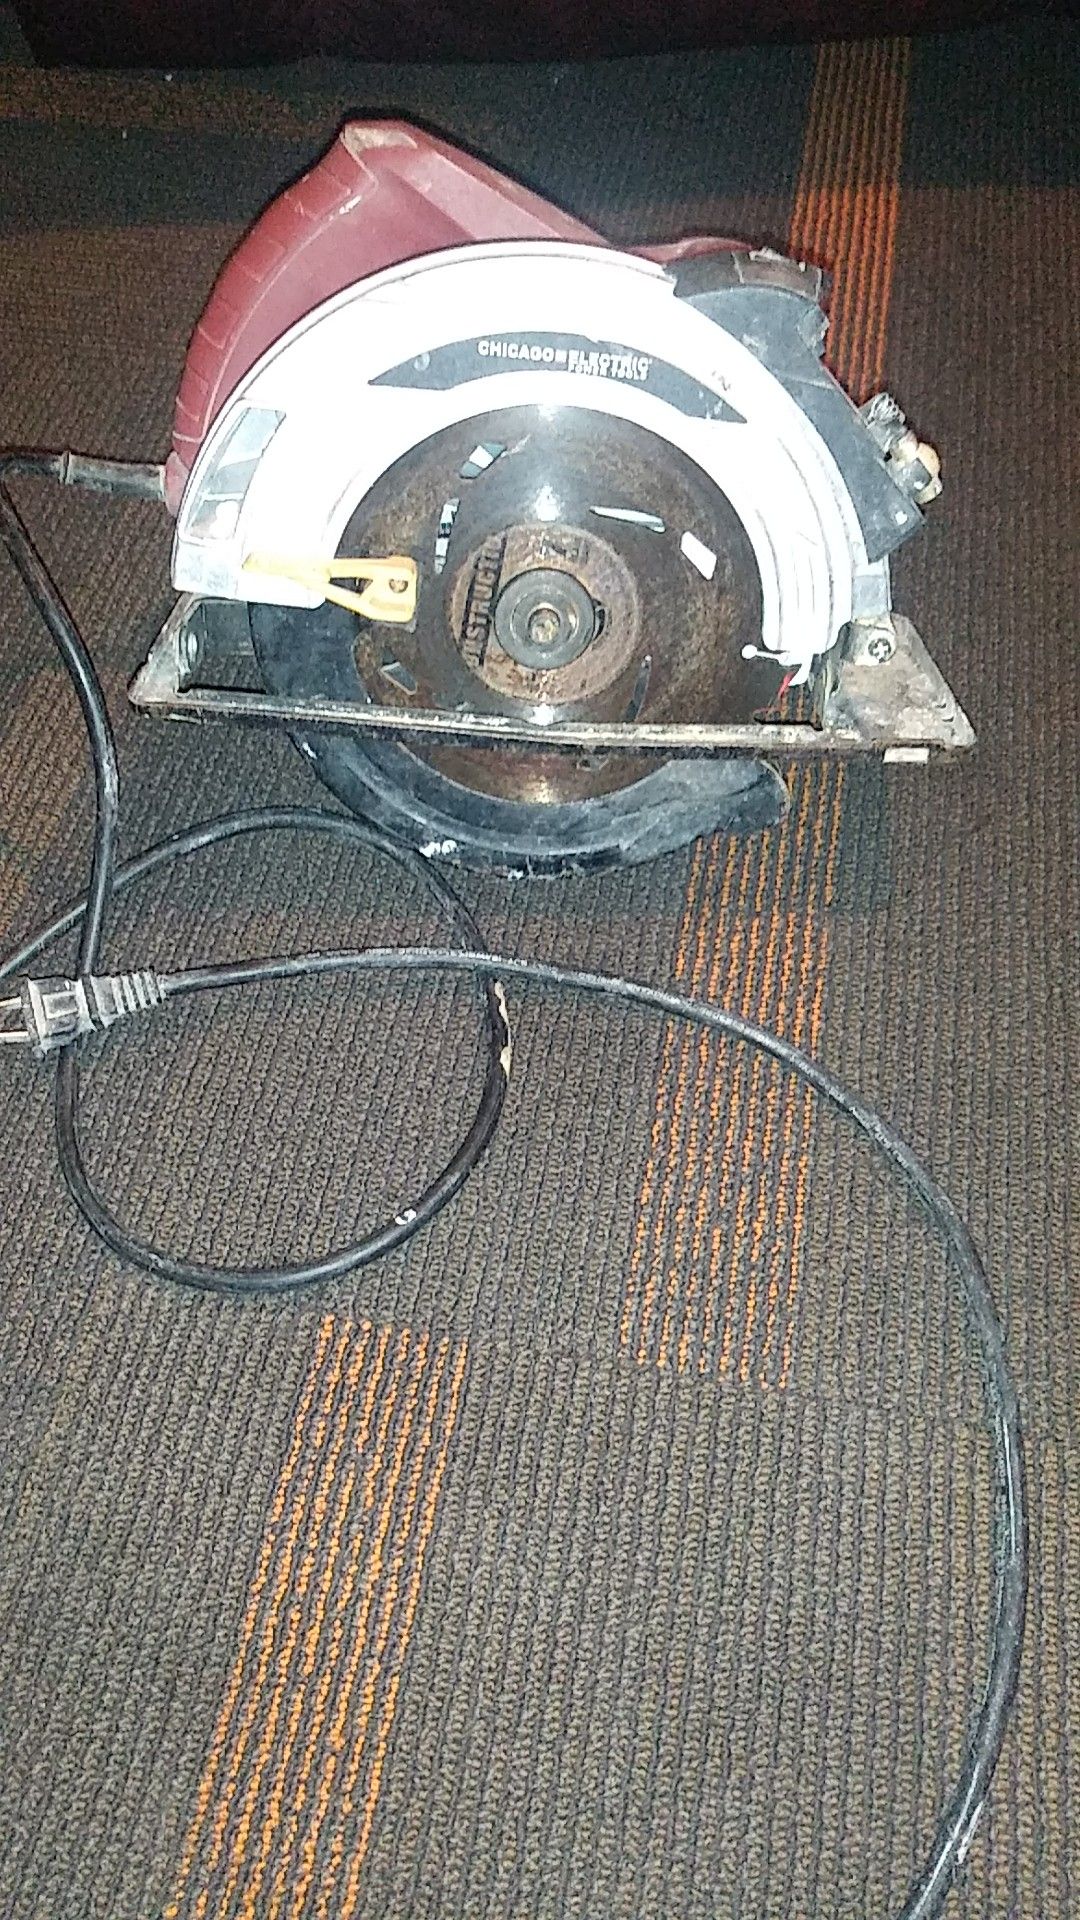 Chicago Electric power tools circular saw